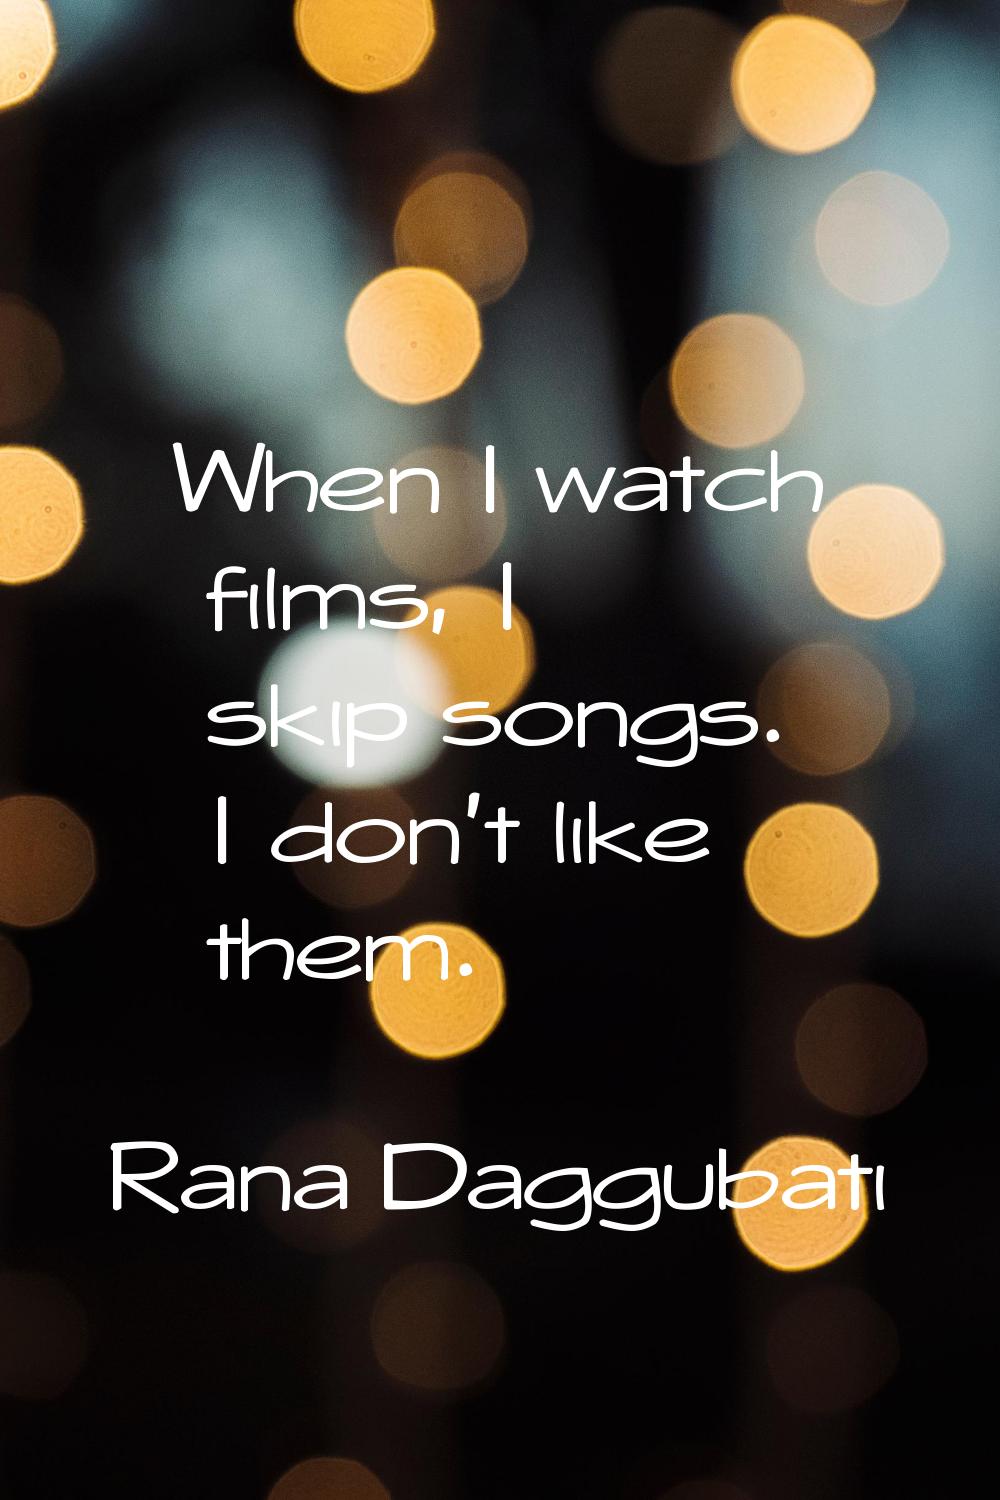 When I watch films, I skip songs. I don't like them.